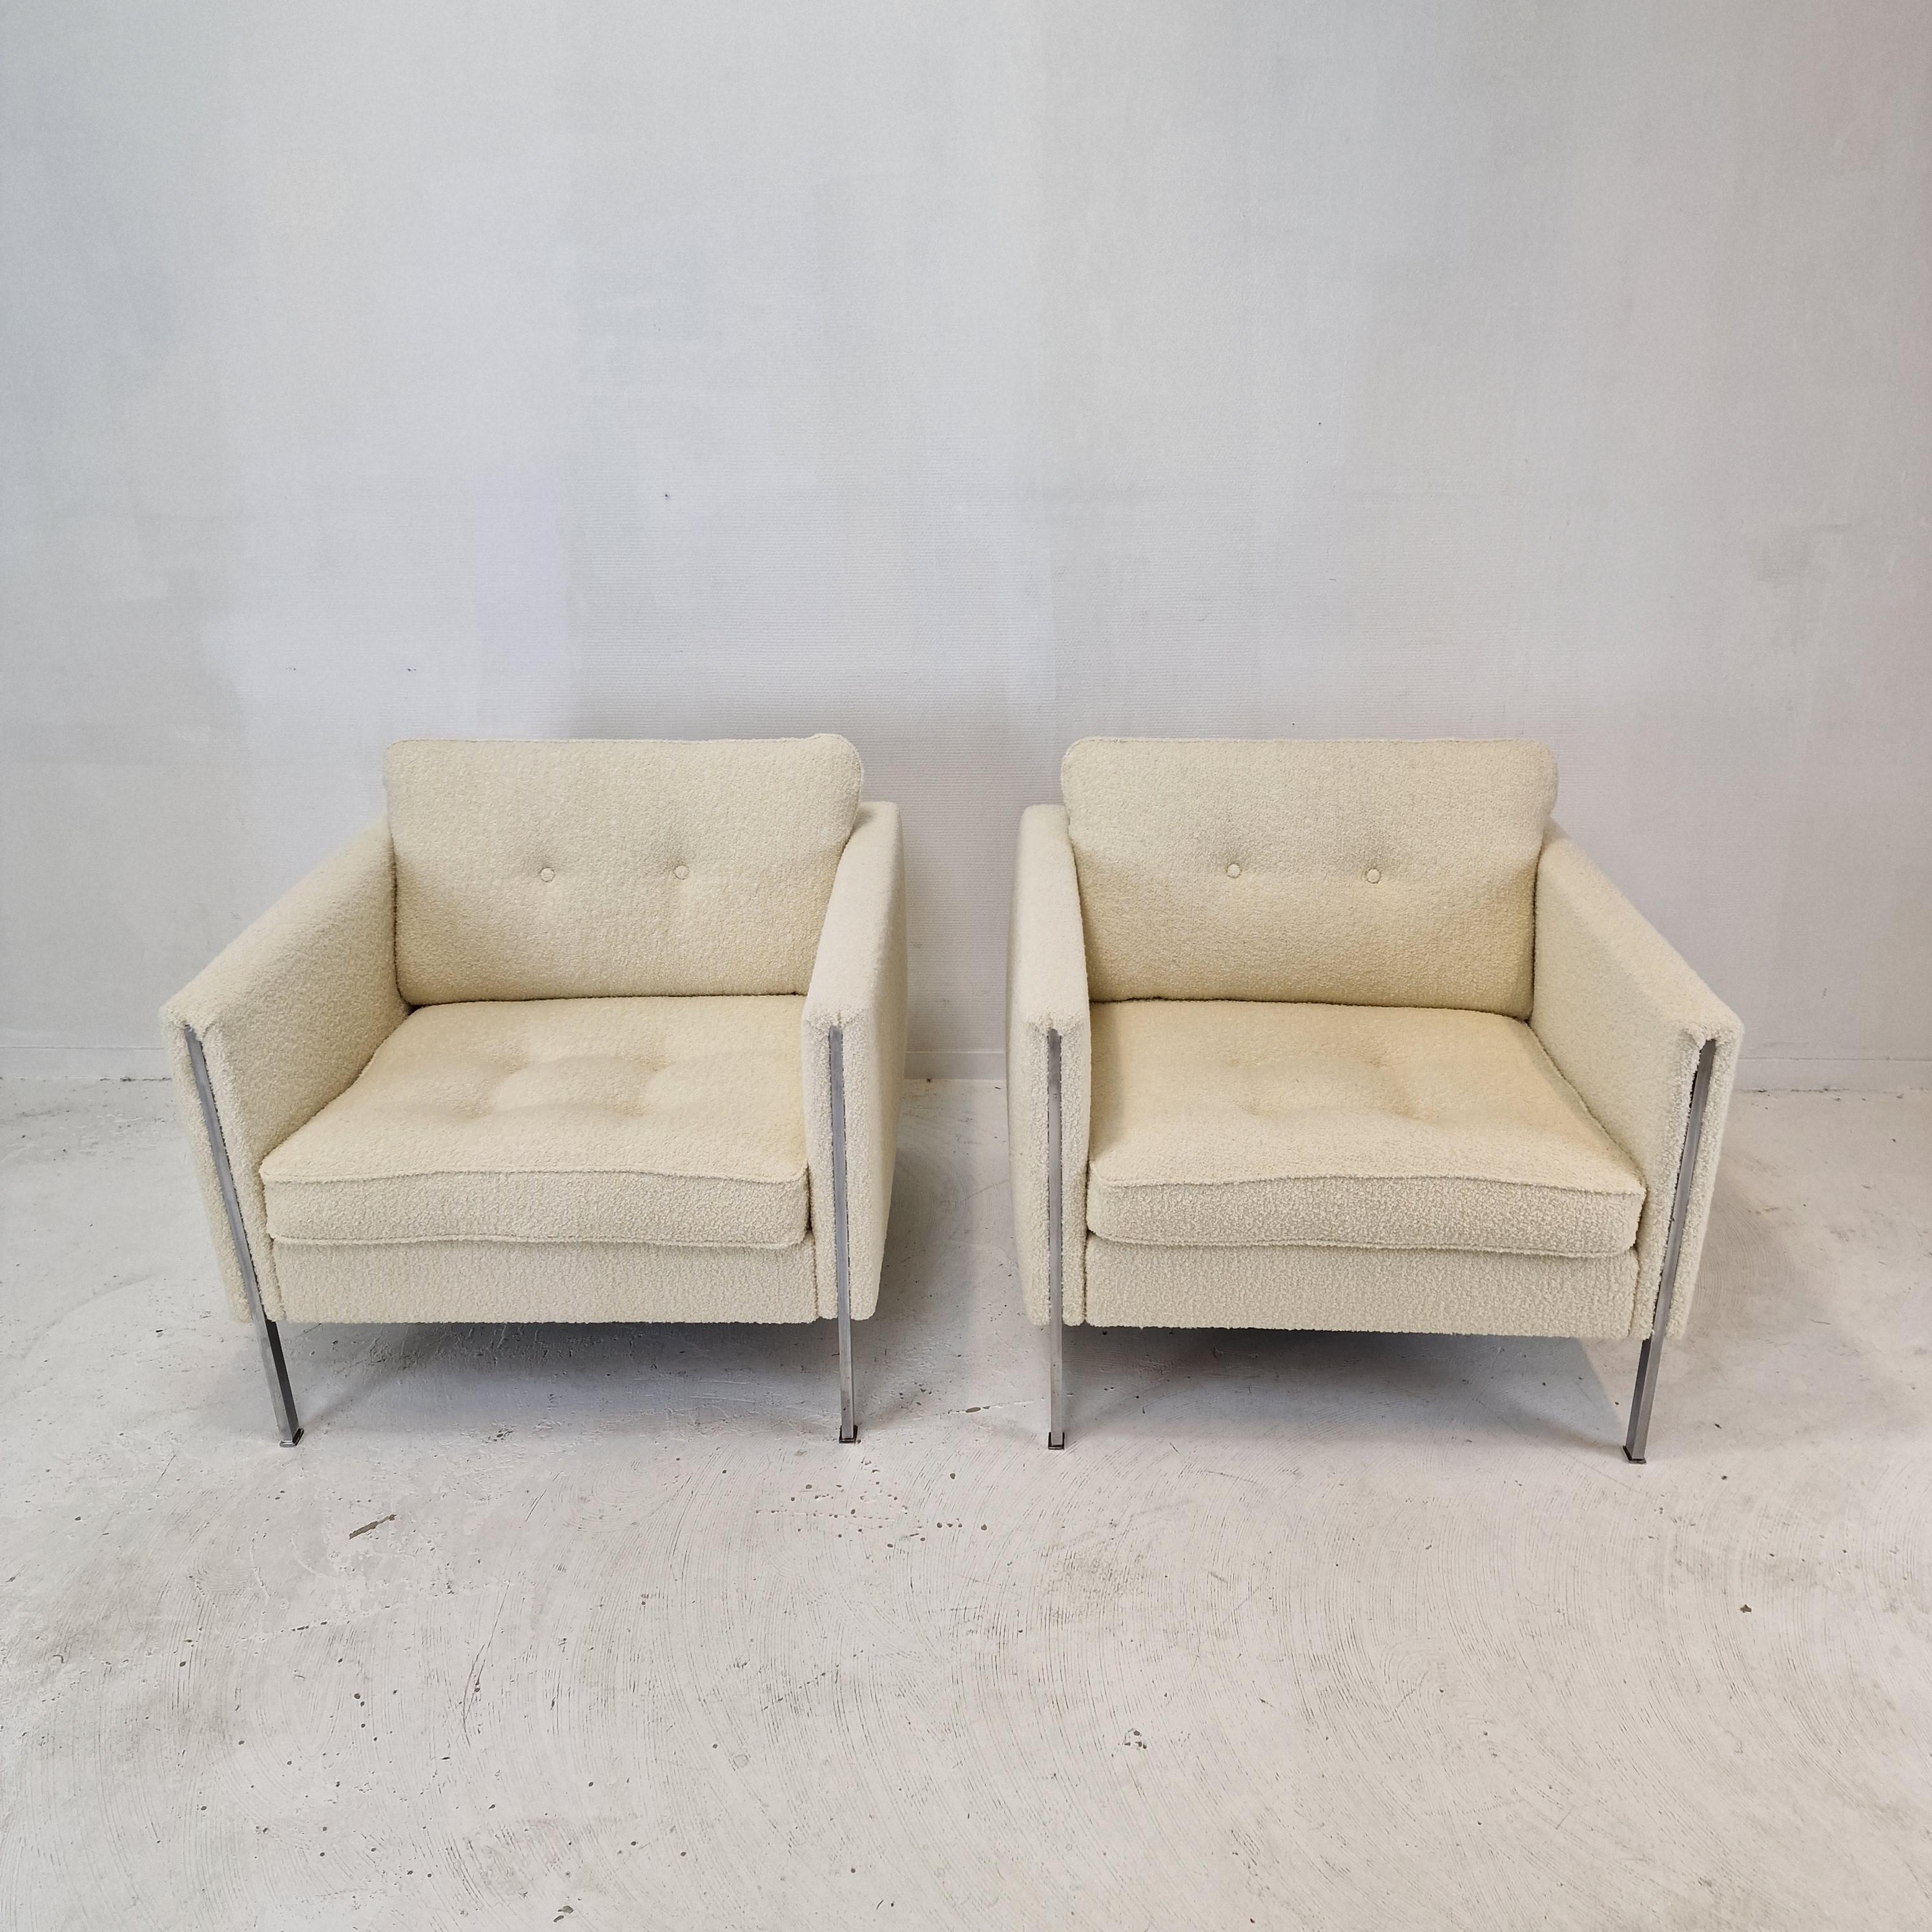 Dutch Midcentury Set of 2 Model 442 Chairs by Pierre Paulin for Artifort, 1960s For Sale